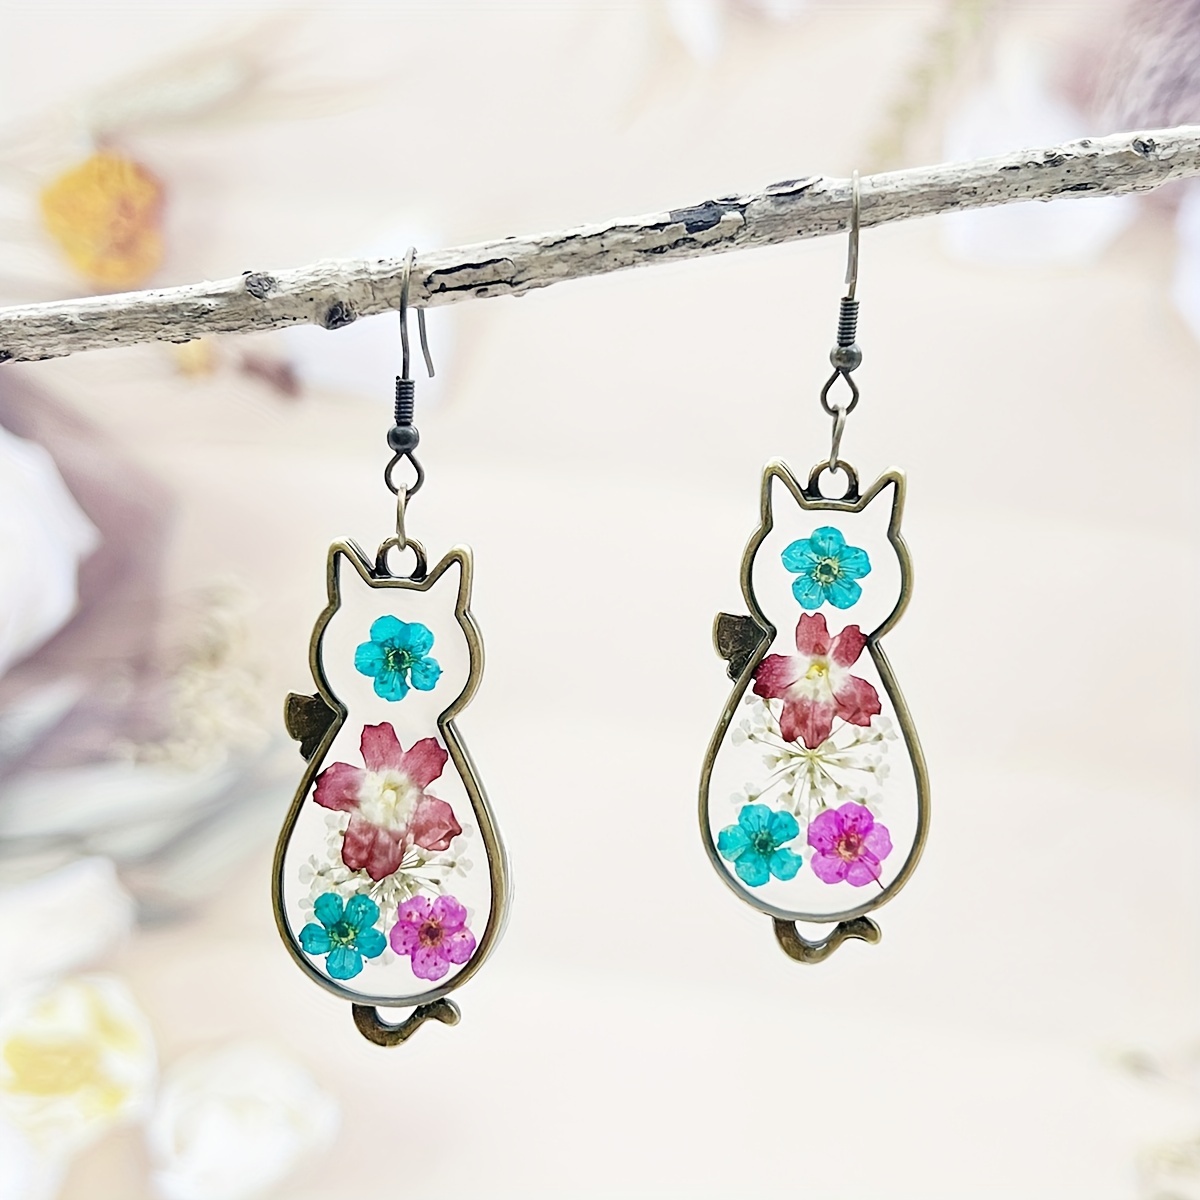 

Vintage Style Cat Earrings With Pressed Flowers - Boho Nautical Fashion Animal Drop Dangle Earrings, Alloy & Iron Ear Wire, No Plating, Handcrafted Mosaic Floral Design, Daily & Vacation Accessory